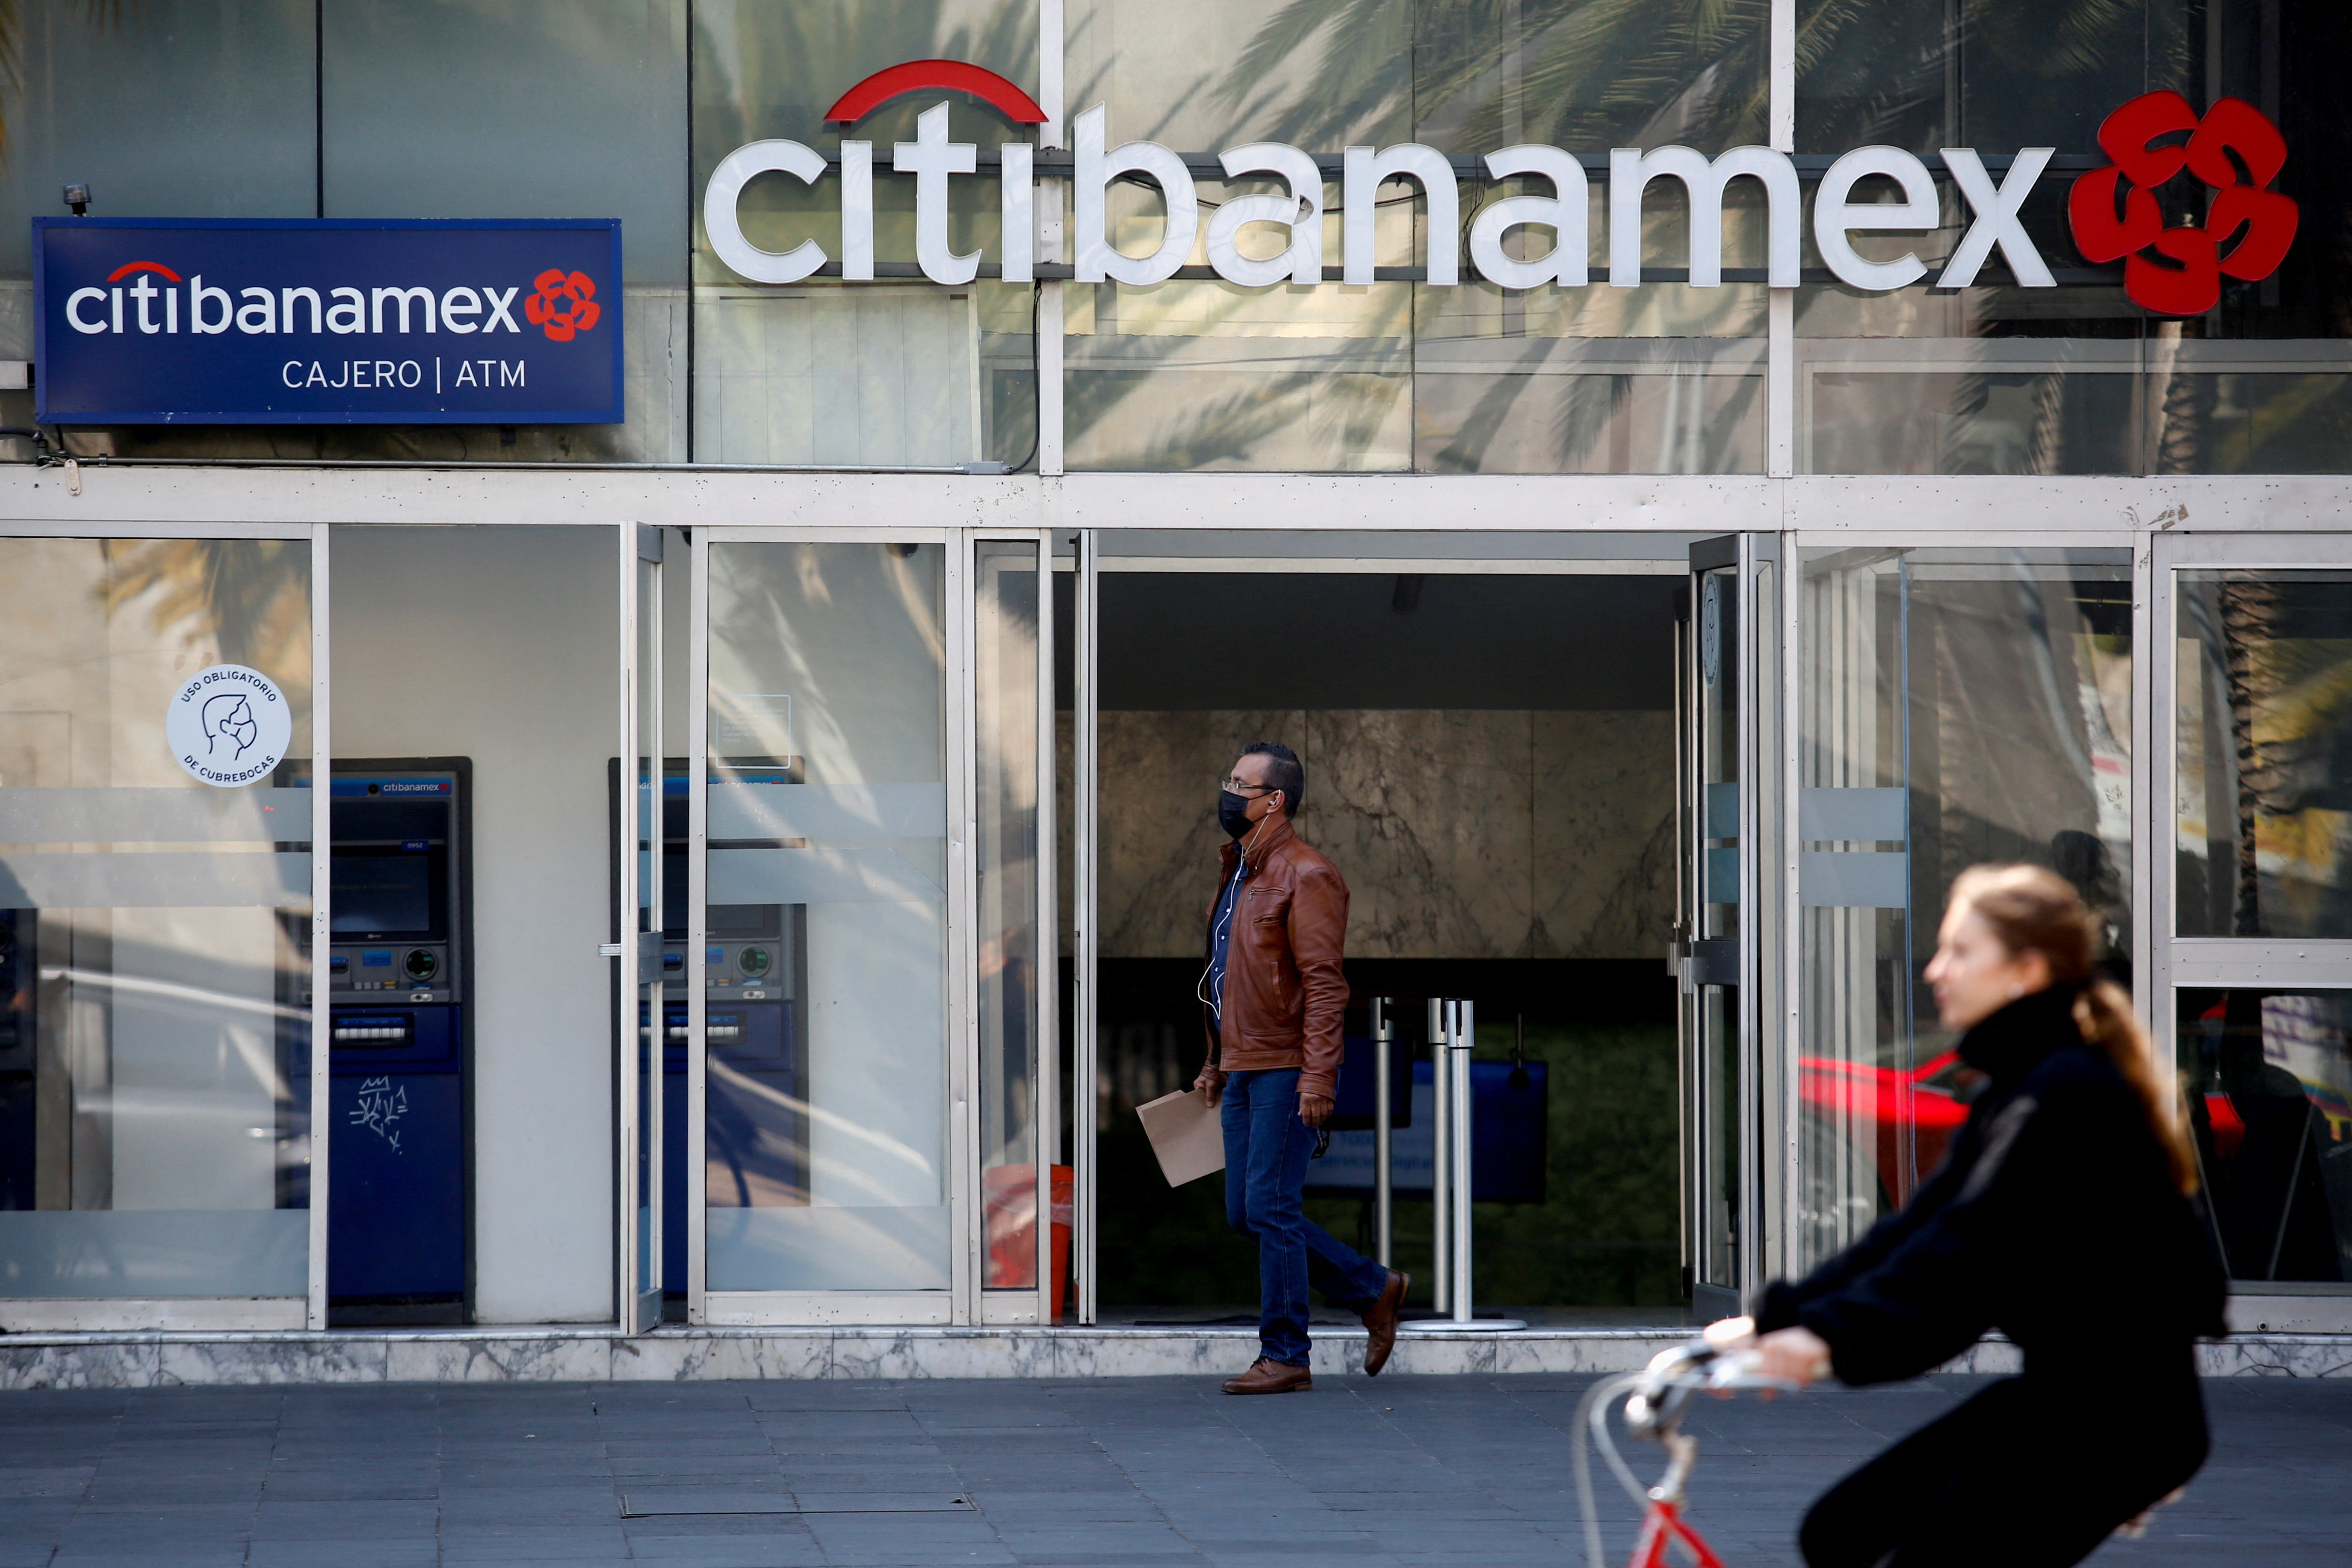 FILE PHOTO: A man exits a Citibanamex bank branch in Mexico City, Mexico January 13, 2022. REUTERS/Gustavo Graf/File Photo/File Photo